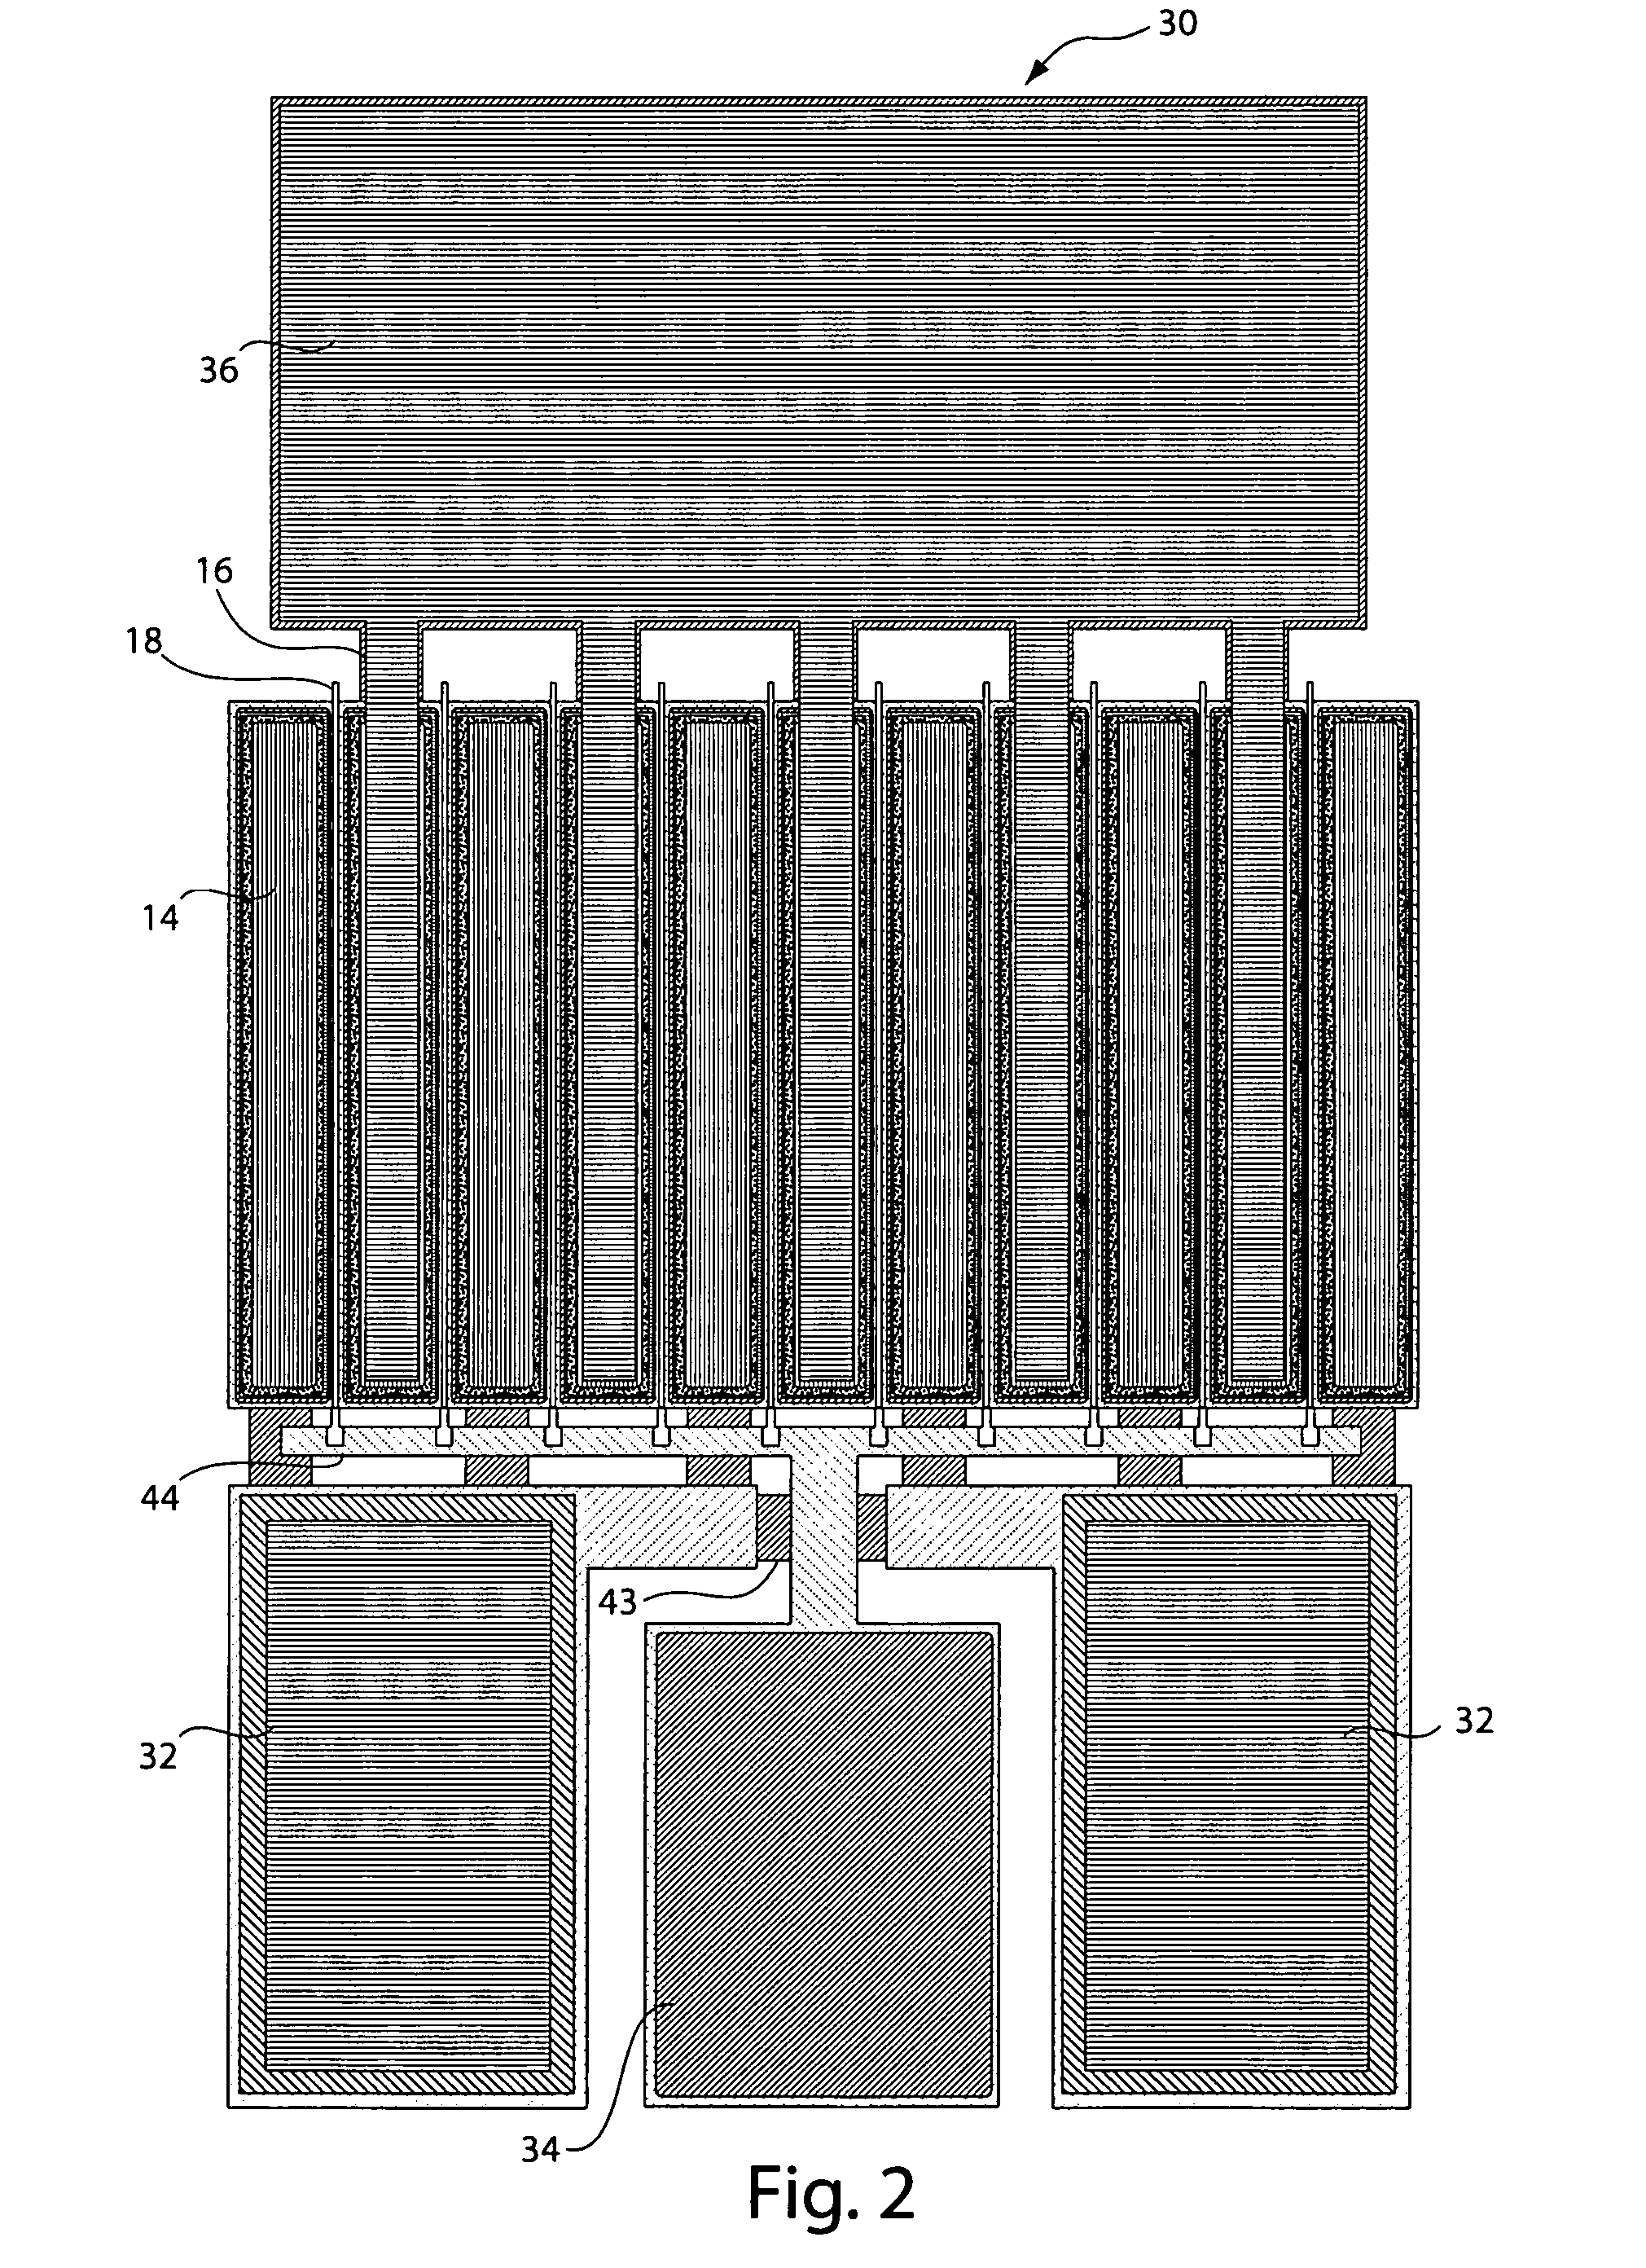 Gallium nitride material transistors and methods associated with the same